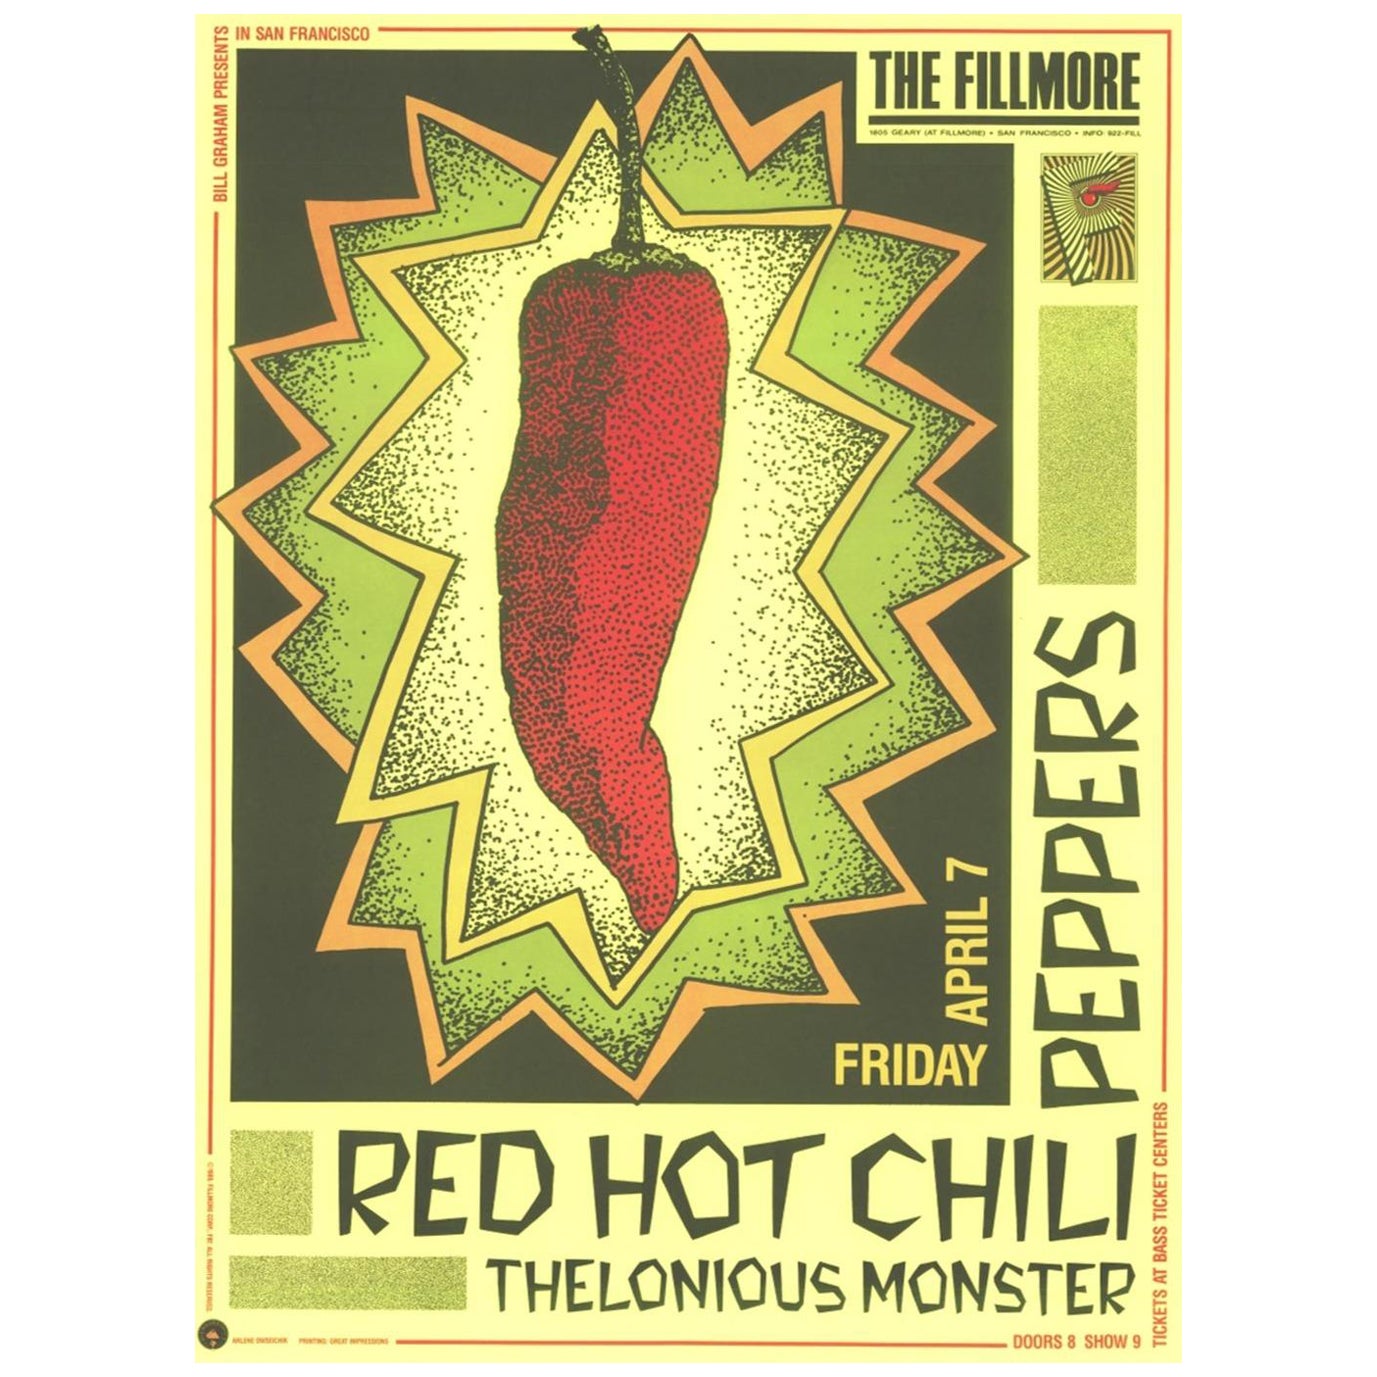 1989 Red Hot Chili Peppers - The Fillmore Original Vintage Poster For Sale